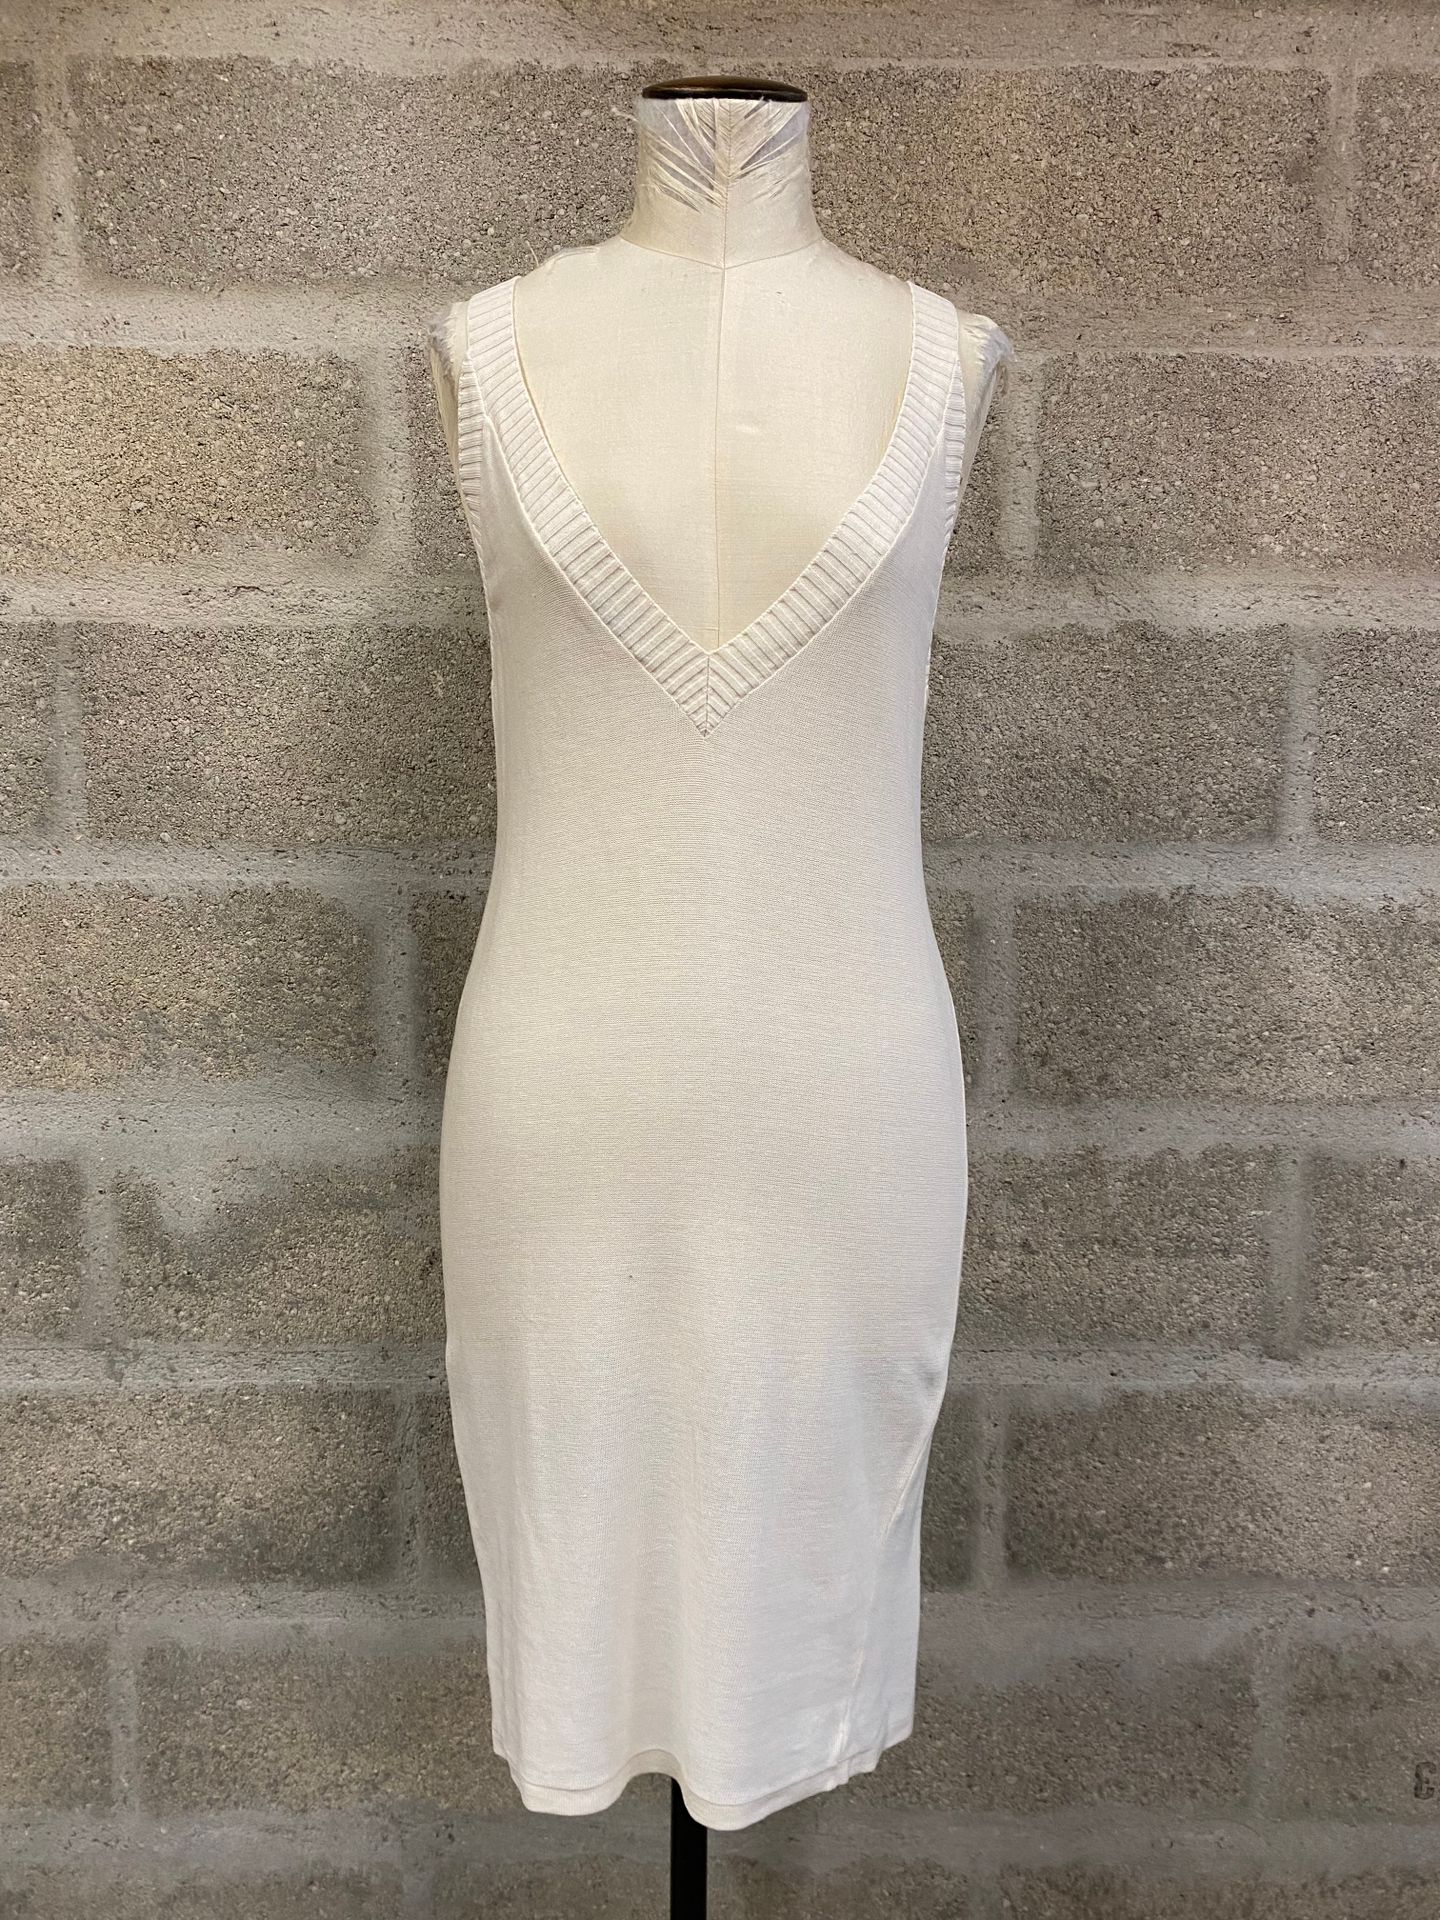 CHLOE - Cream cotton knit strapless dress with V-neckline in the back 

- Short &hellip;